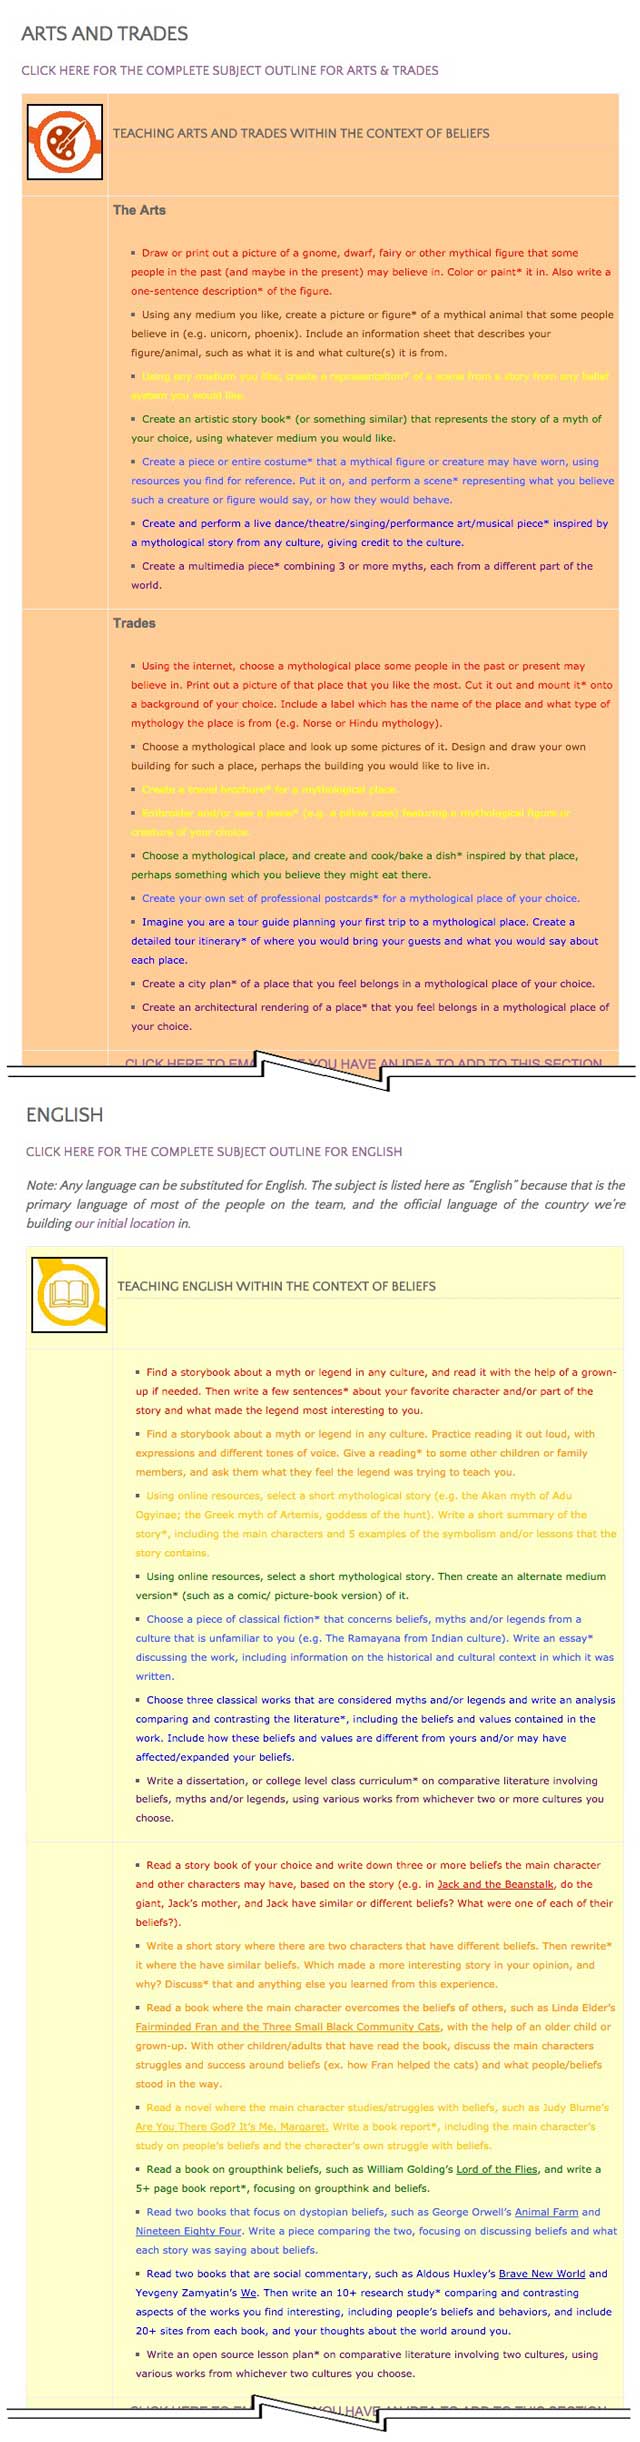 This last week the core team transferred the first 25% of the written content for the Beliefs Lesson Plan to the website, as you see here. This lesson plan purposed to teach all subjects, to all learning levels, in any learning environment, using the central theme of “Beliefs” is now 25% completed on our website.